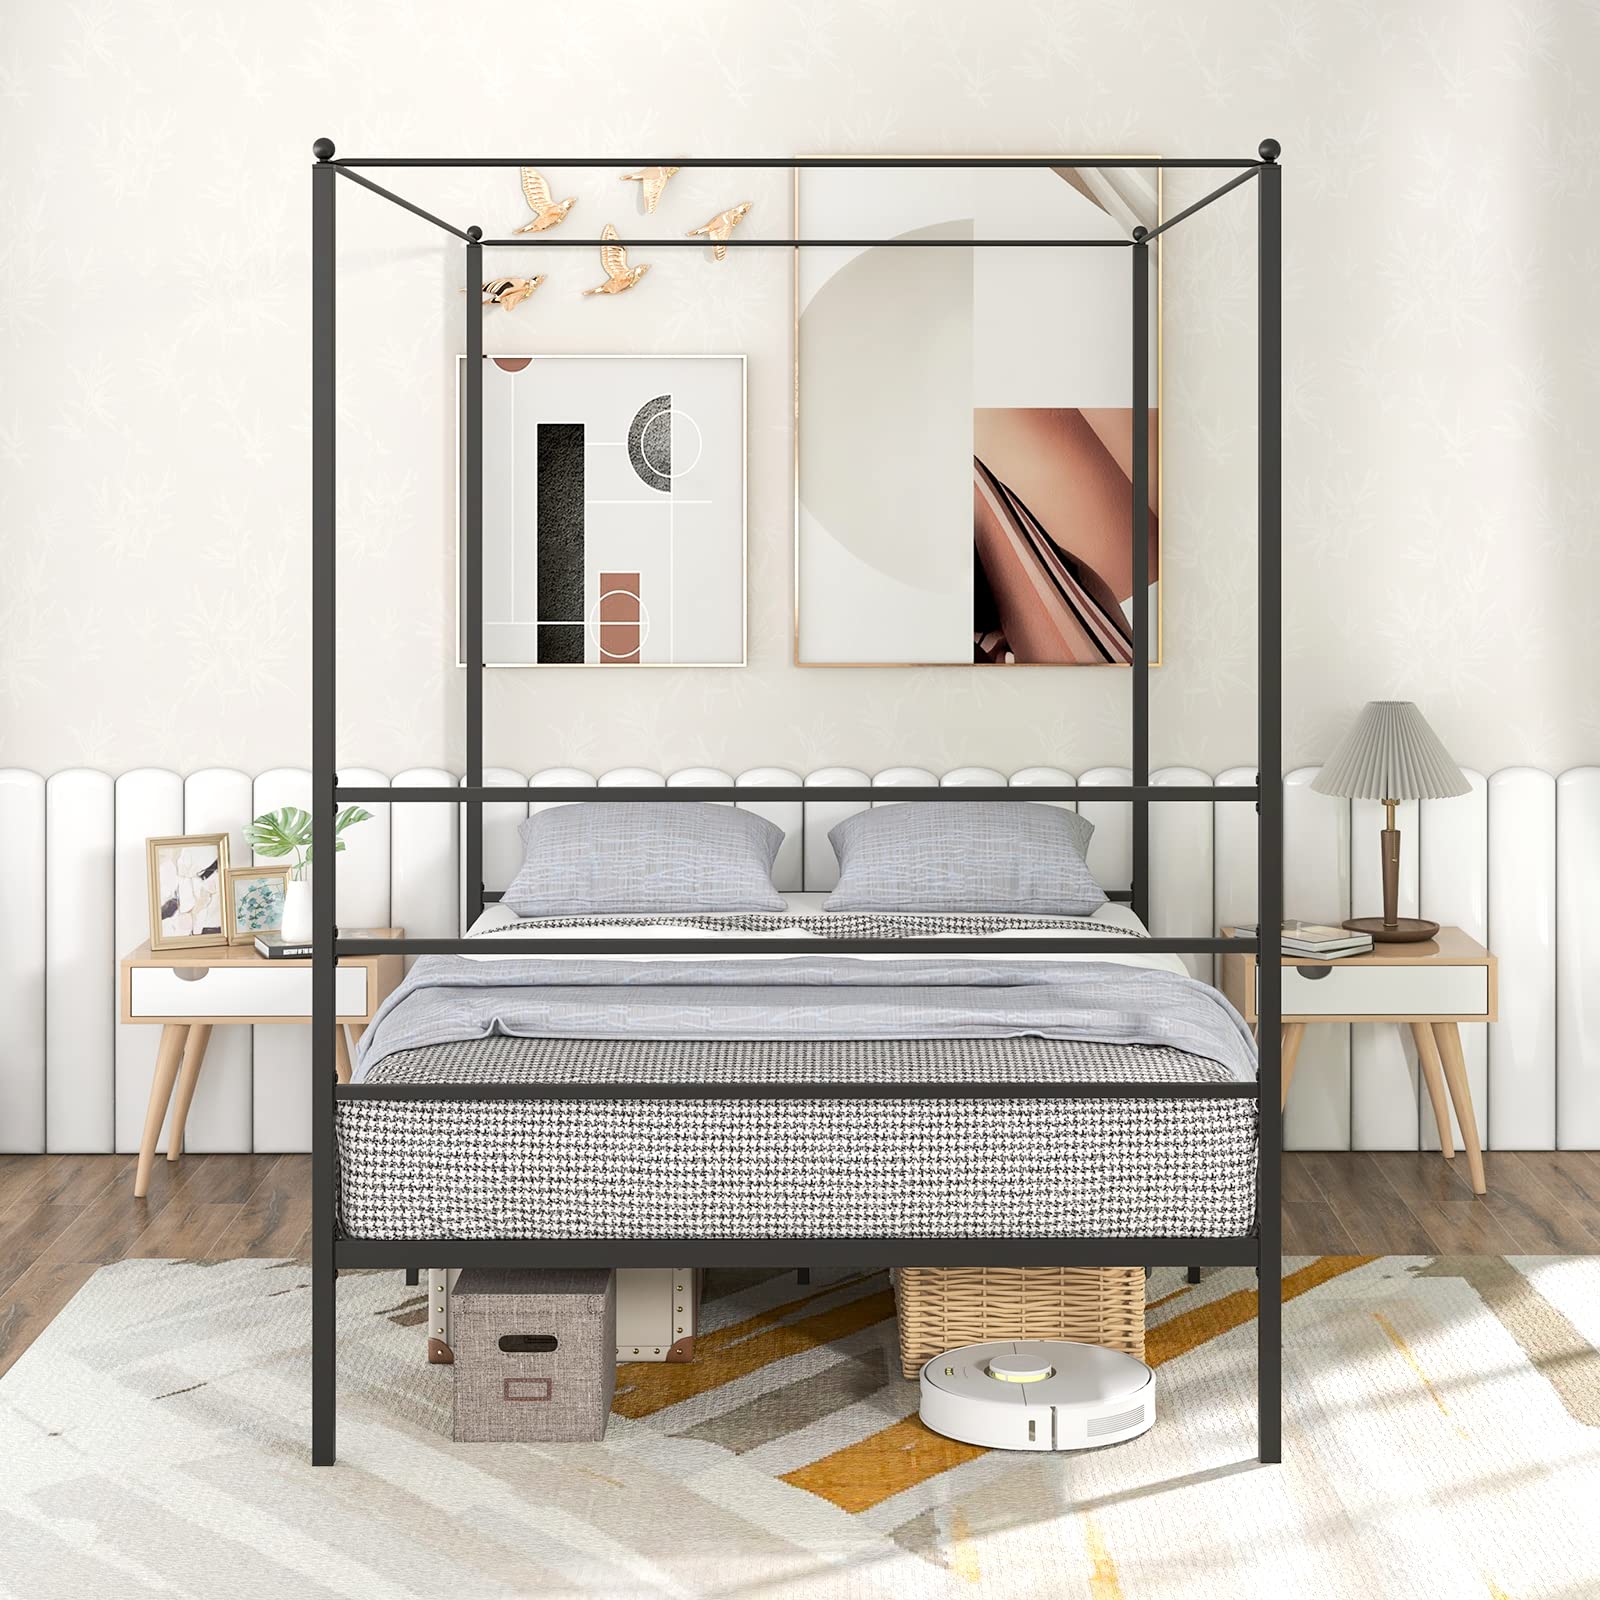 Giantex Full Size Metal Canopy Bed Frame, Modern Platform Bed Frame with 4 Poster & Headboard